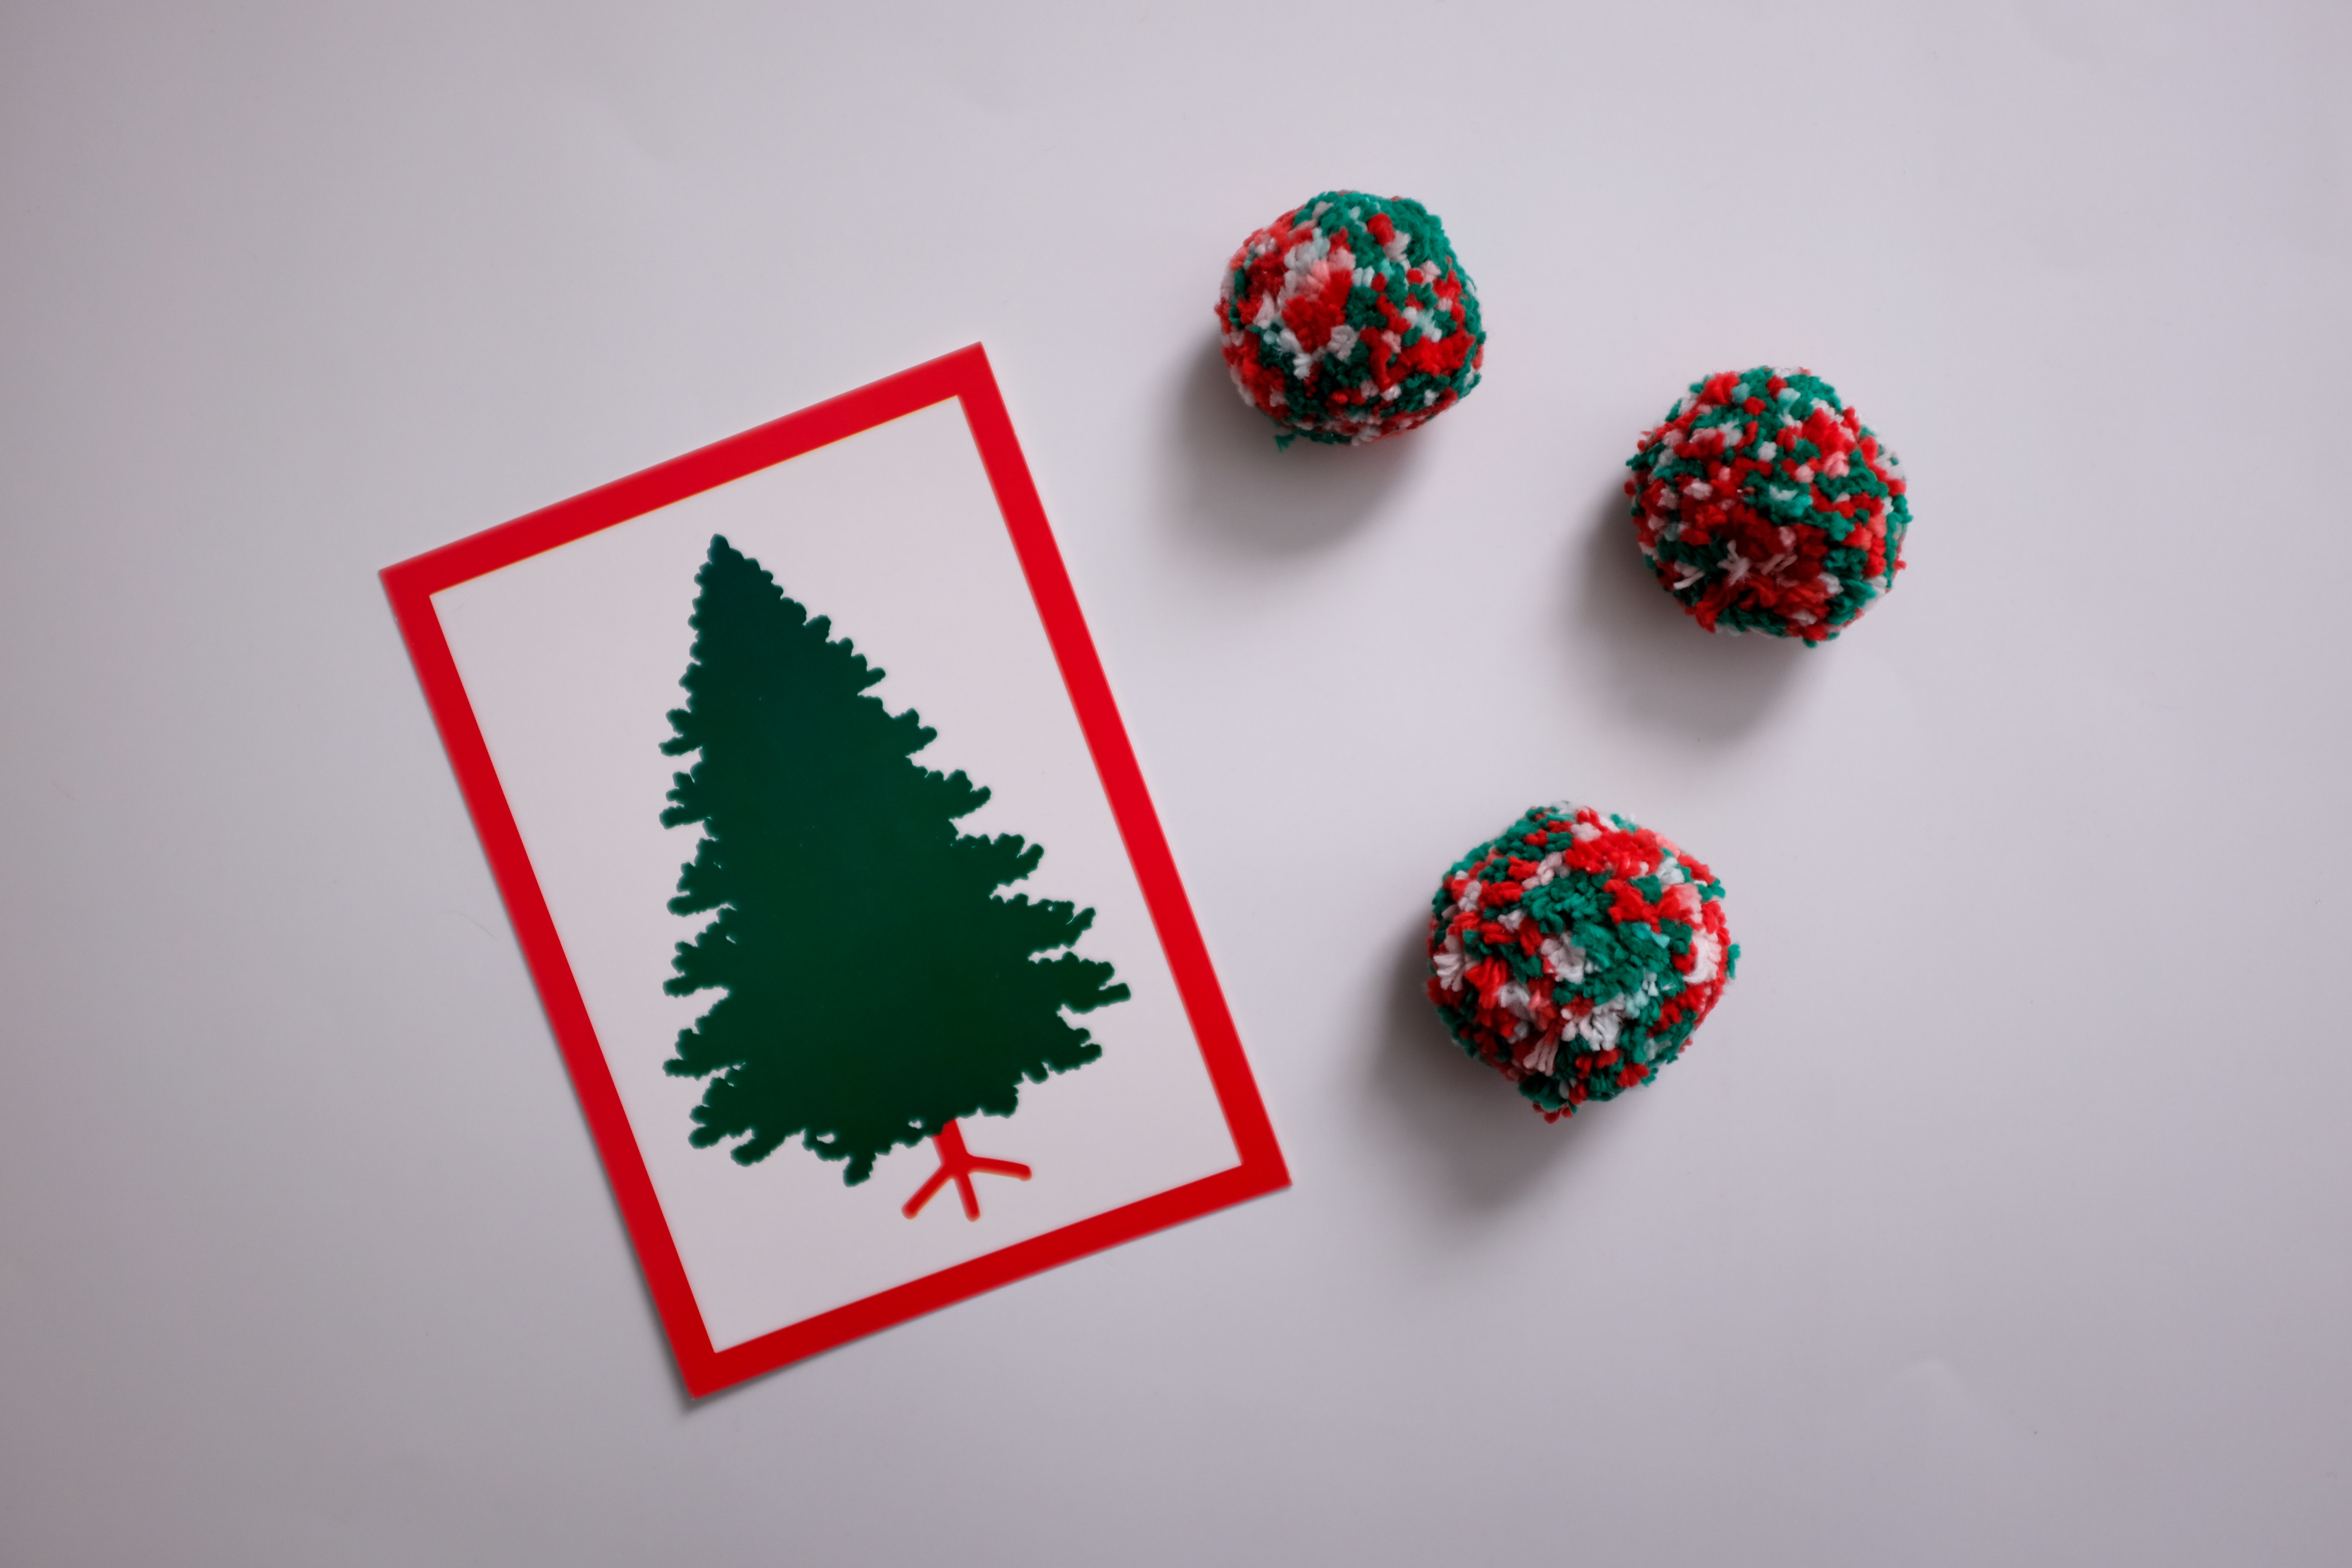 A card with a tree on it with a red border, and three red and green pom poms